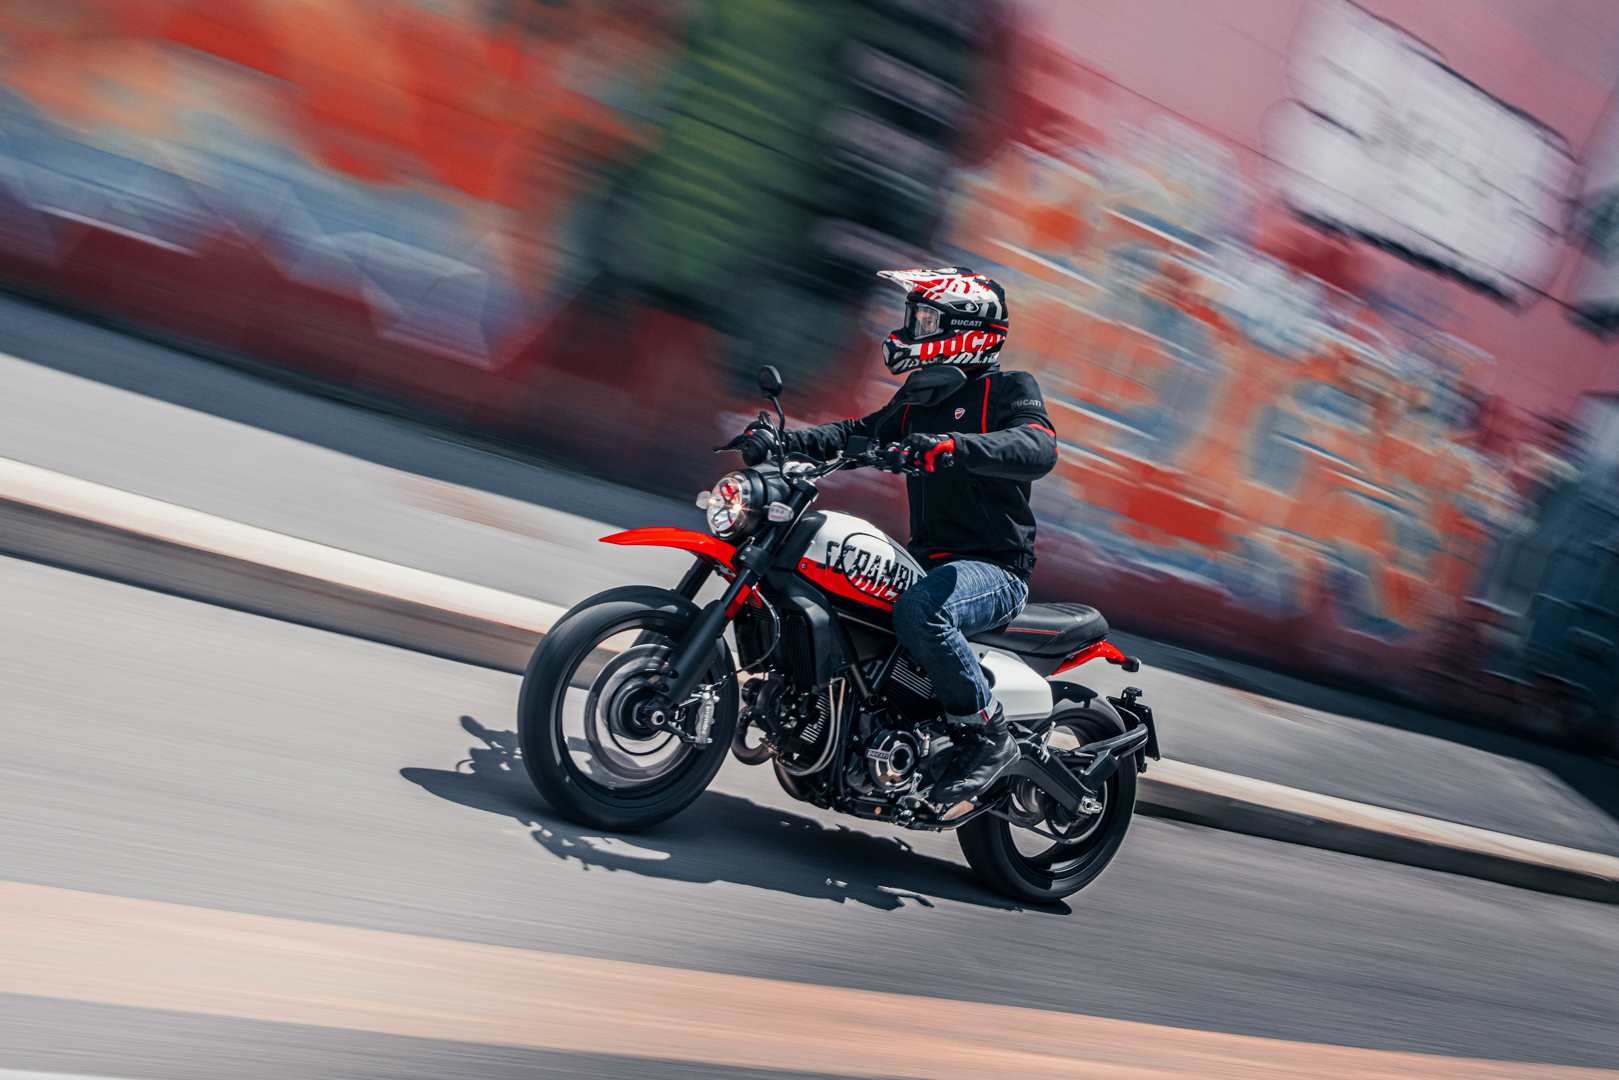 Ducati Scrambler reveals the new models for 2022 to its fans